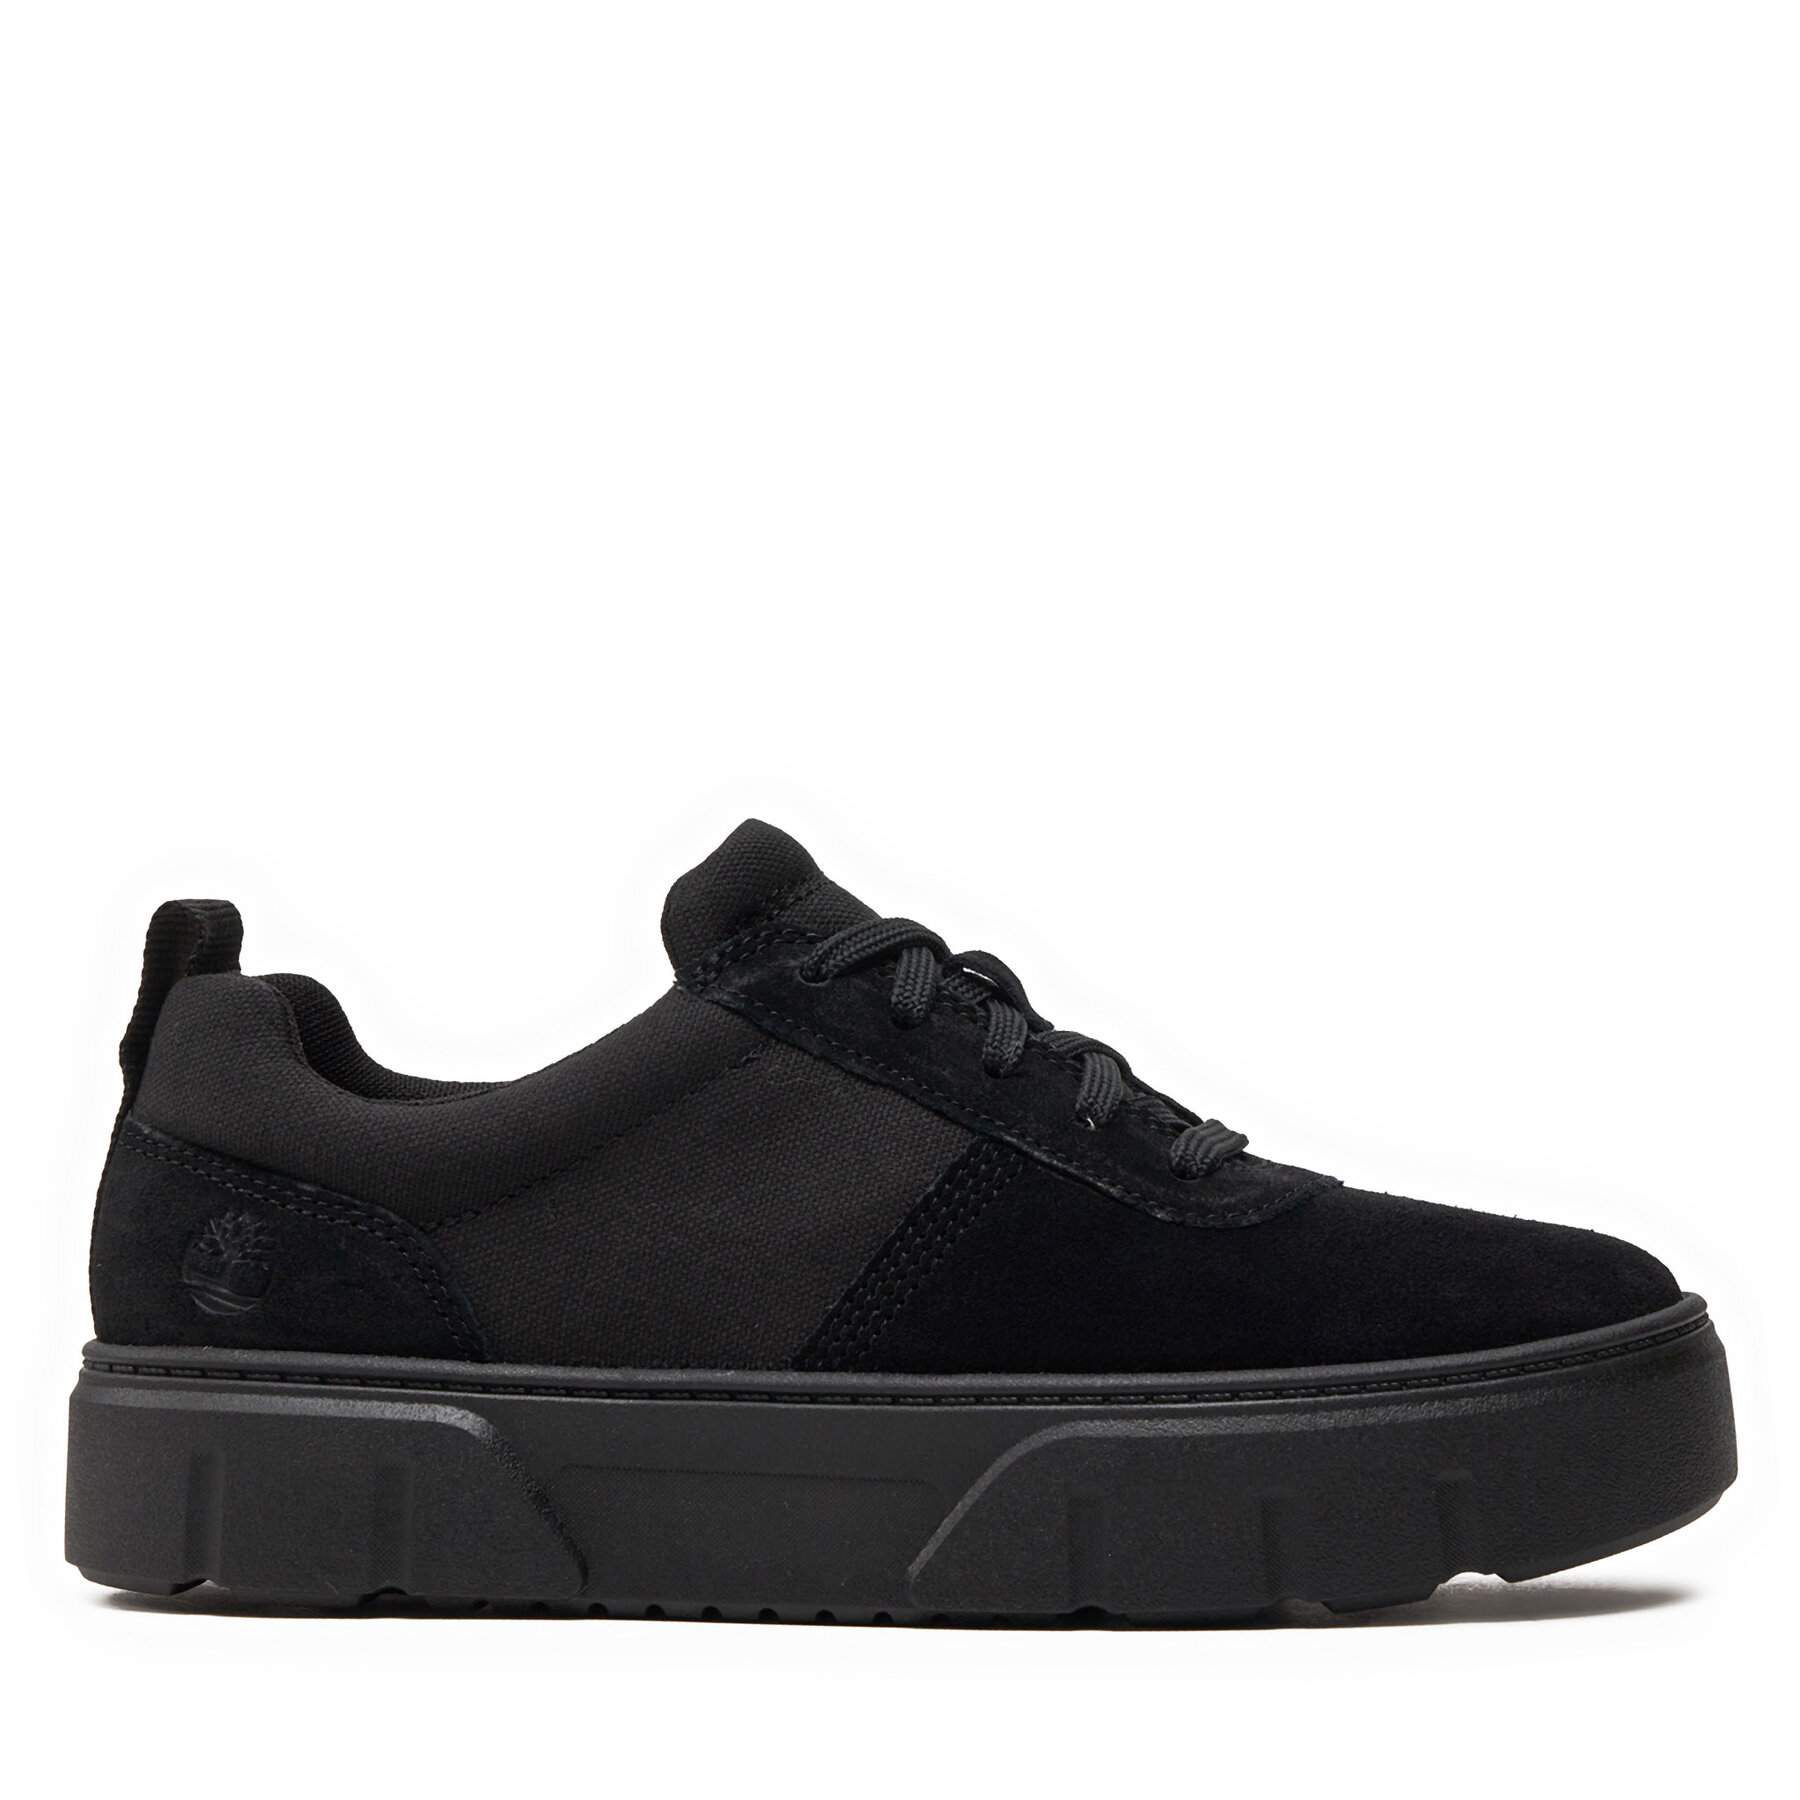 Chaussures basses Timberland TB0A64VVEK41 Black Suede